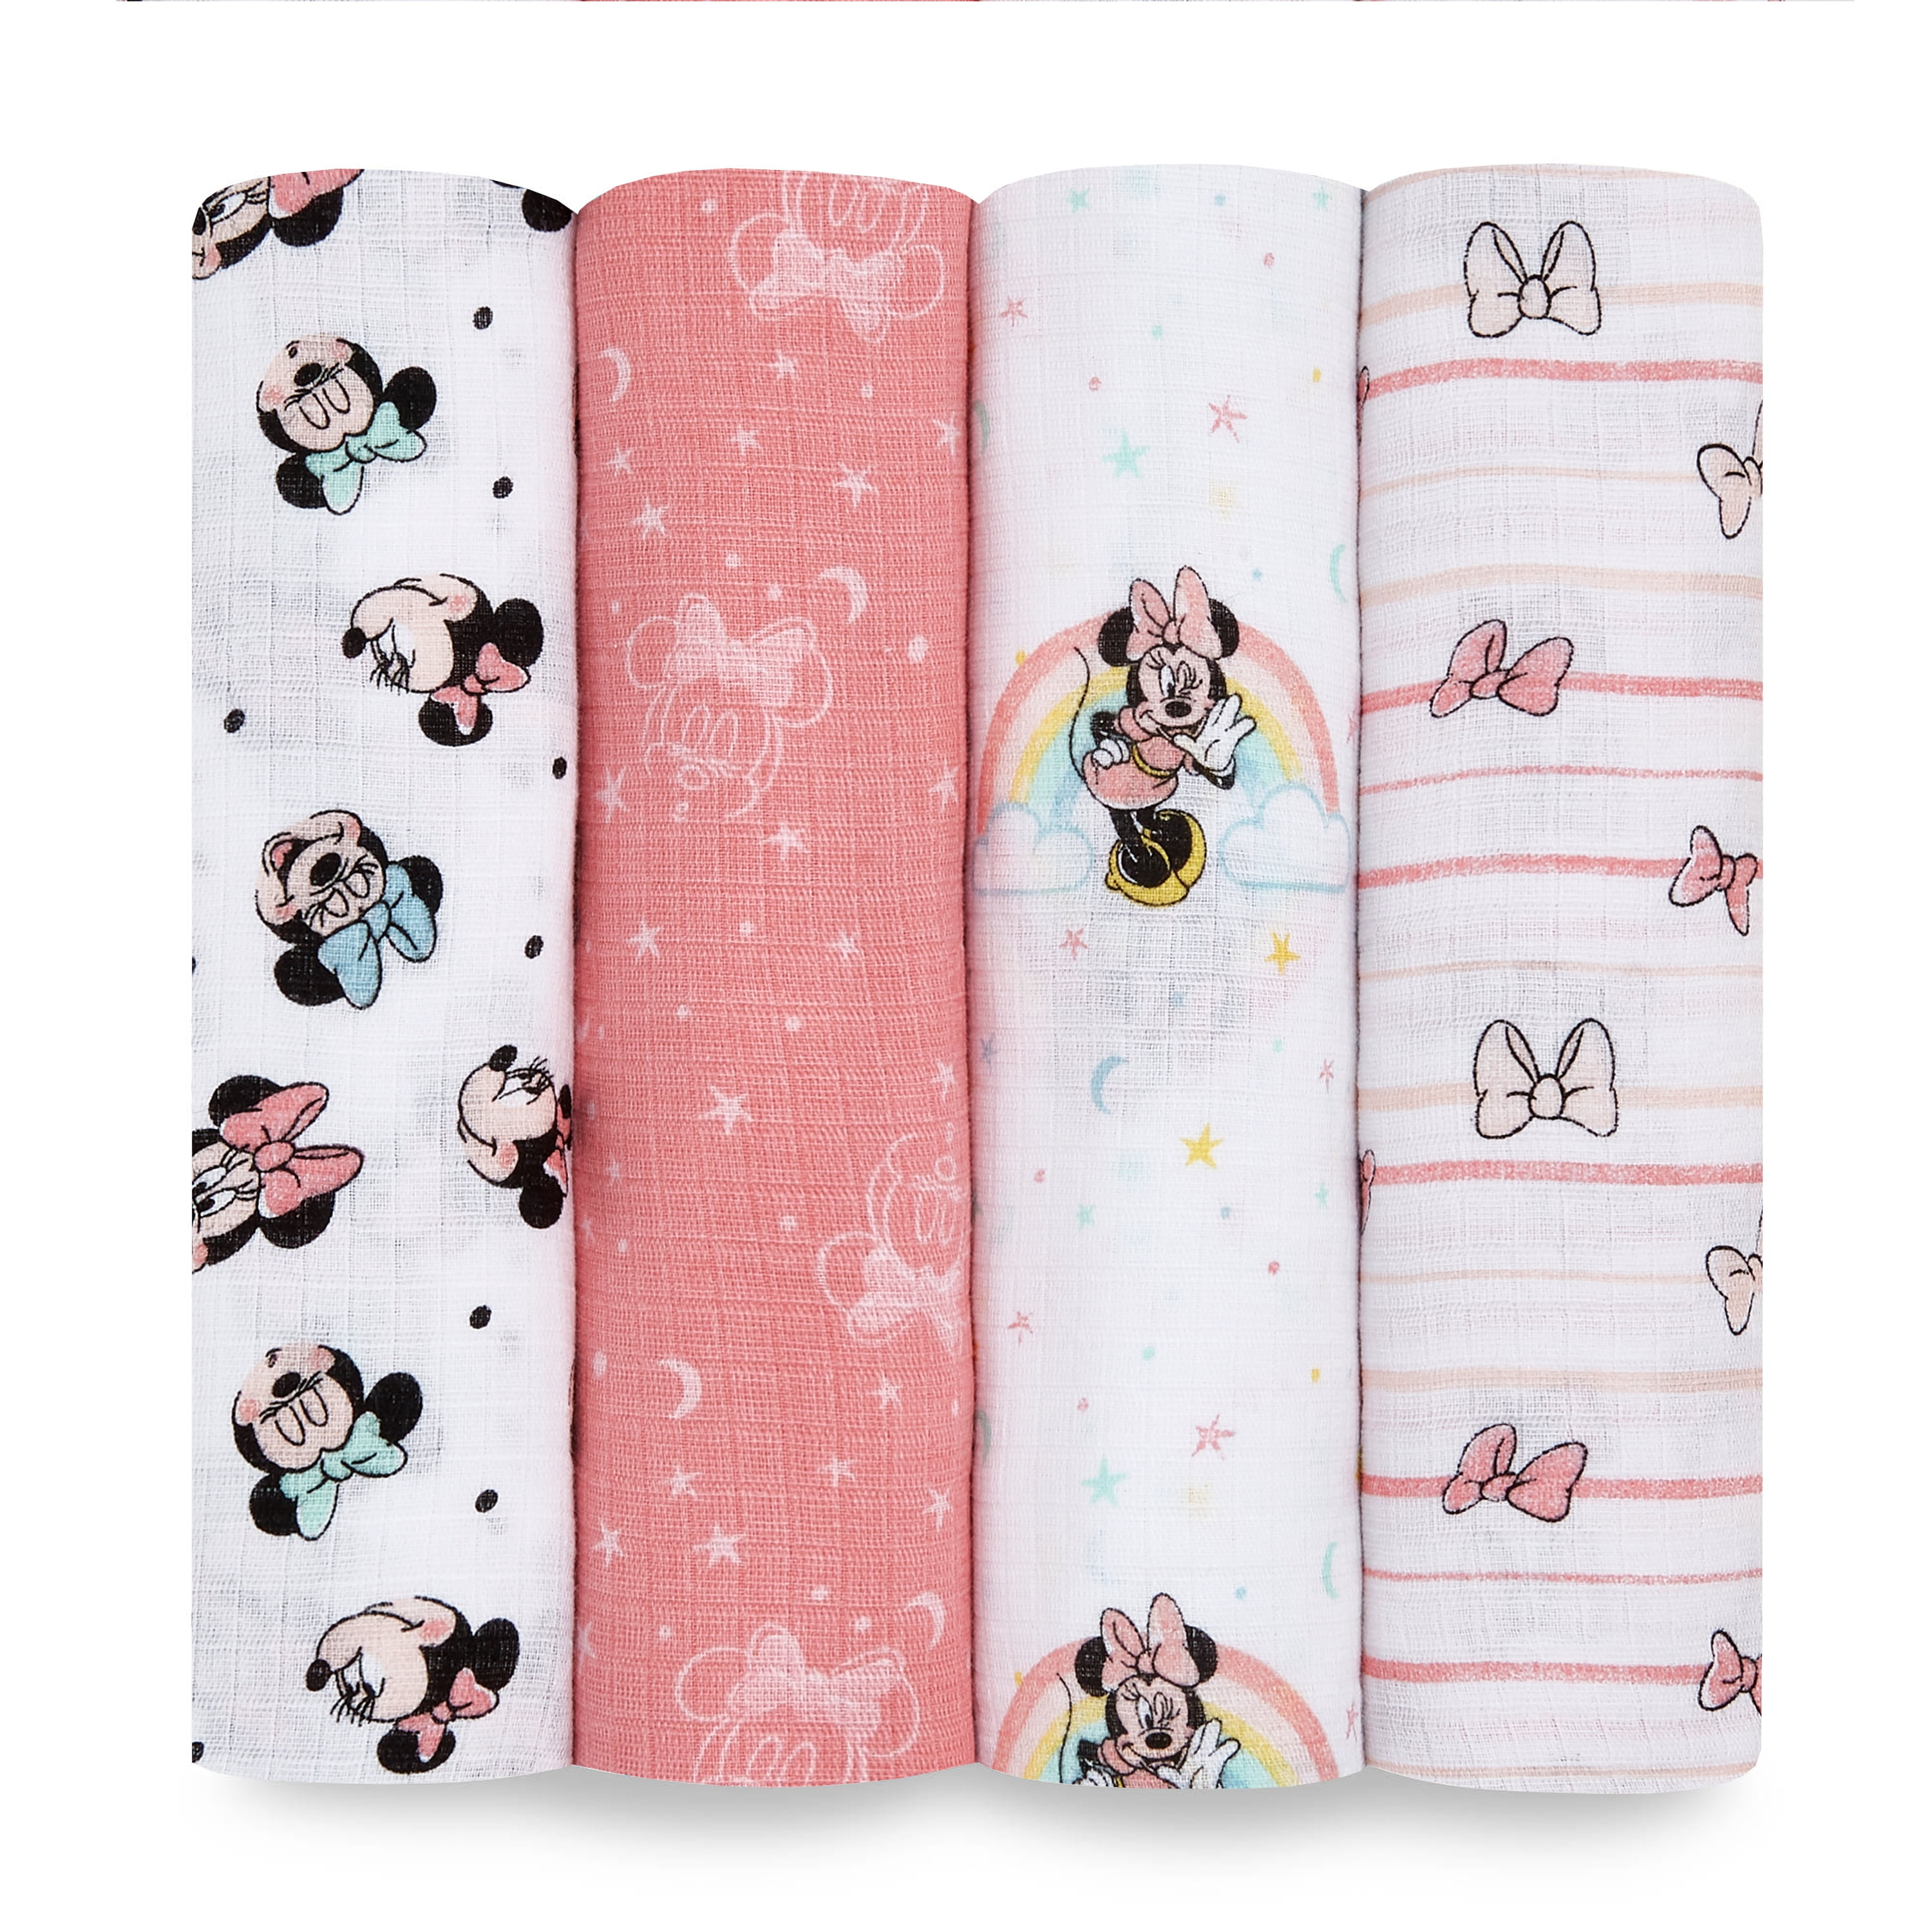 Aden & Anais Ideal Baby Girl Muslin Swaddle Blankets 3-Pack Owl Flowers Pink NWT 